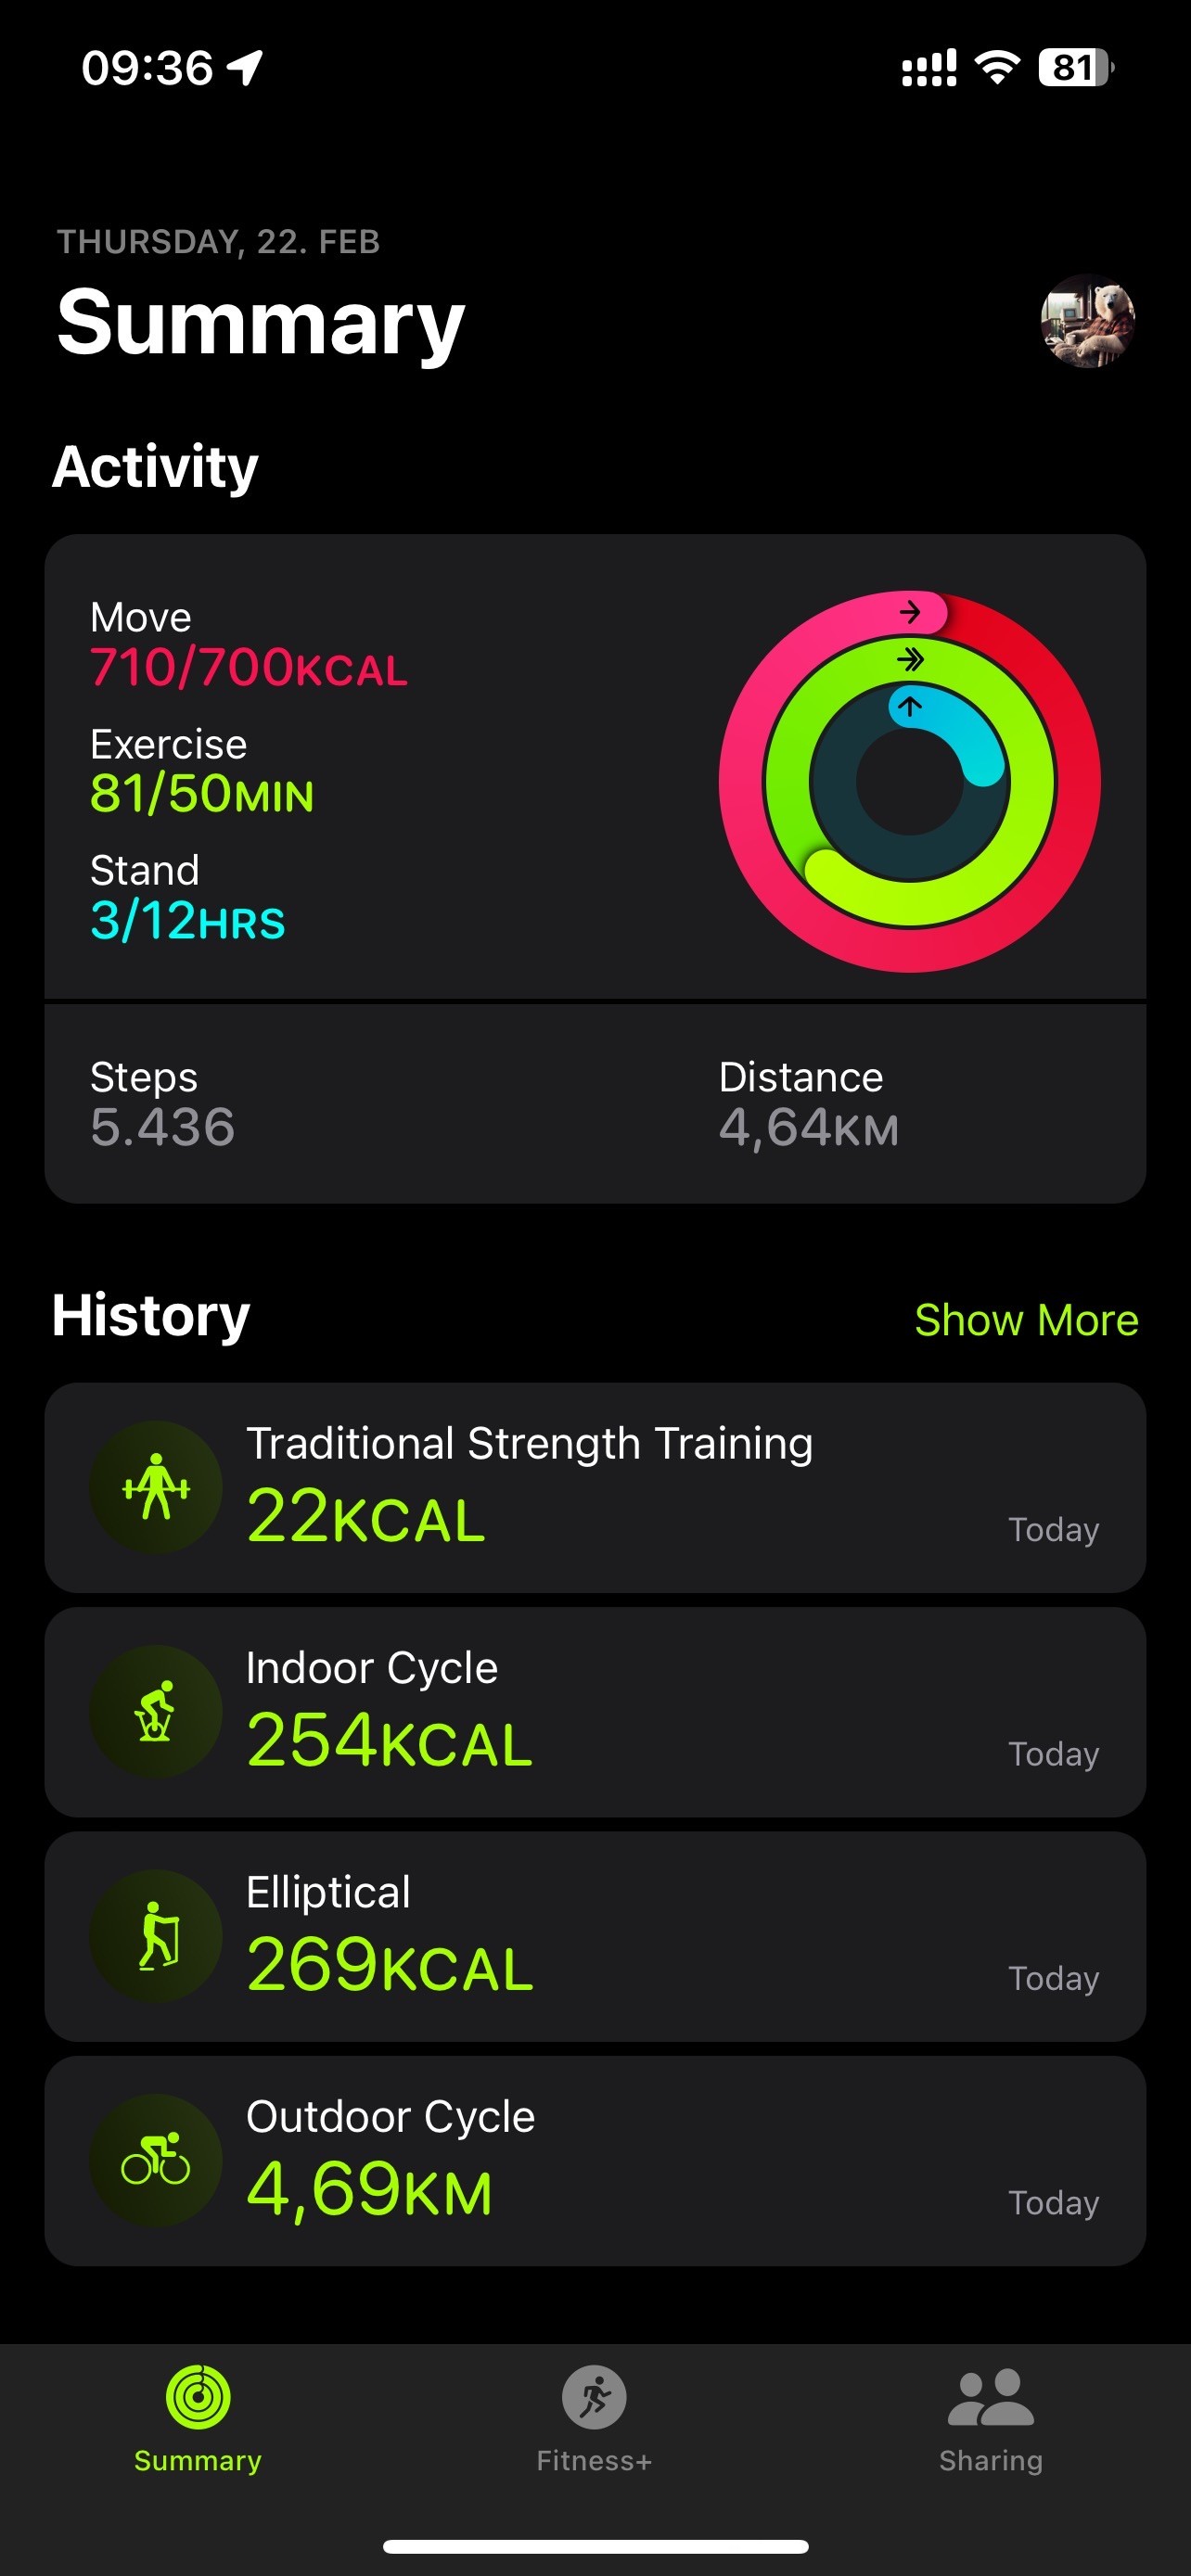 Screenshot of a fitness tracking app showing daily activity summary with completed move, exercise, and stand goals alongside step count and distance covered. Also includes a history of workouts with calories burned and distances cycled.